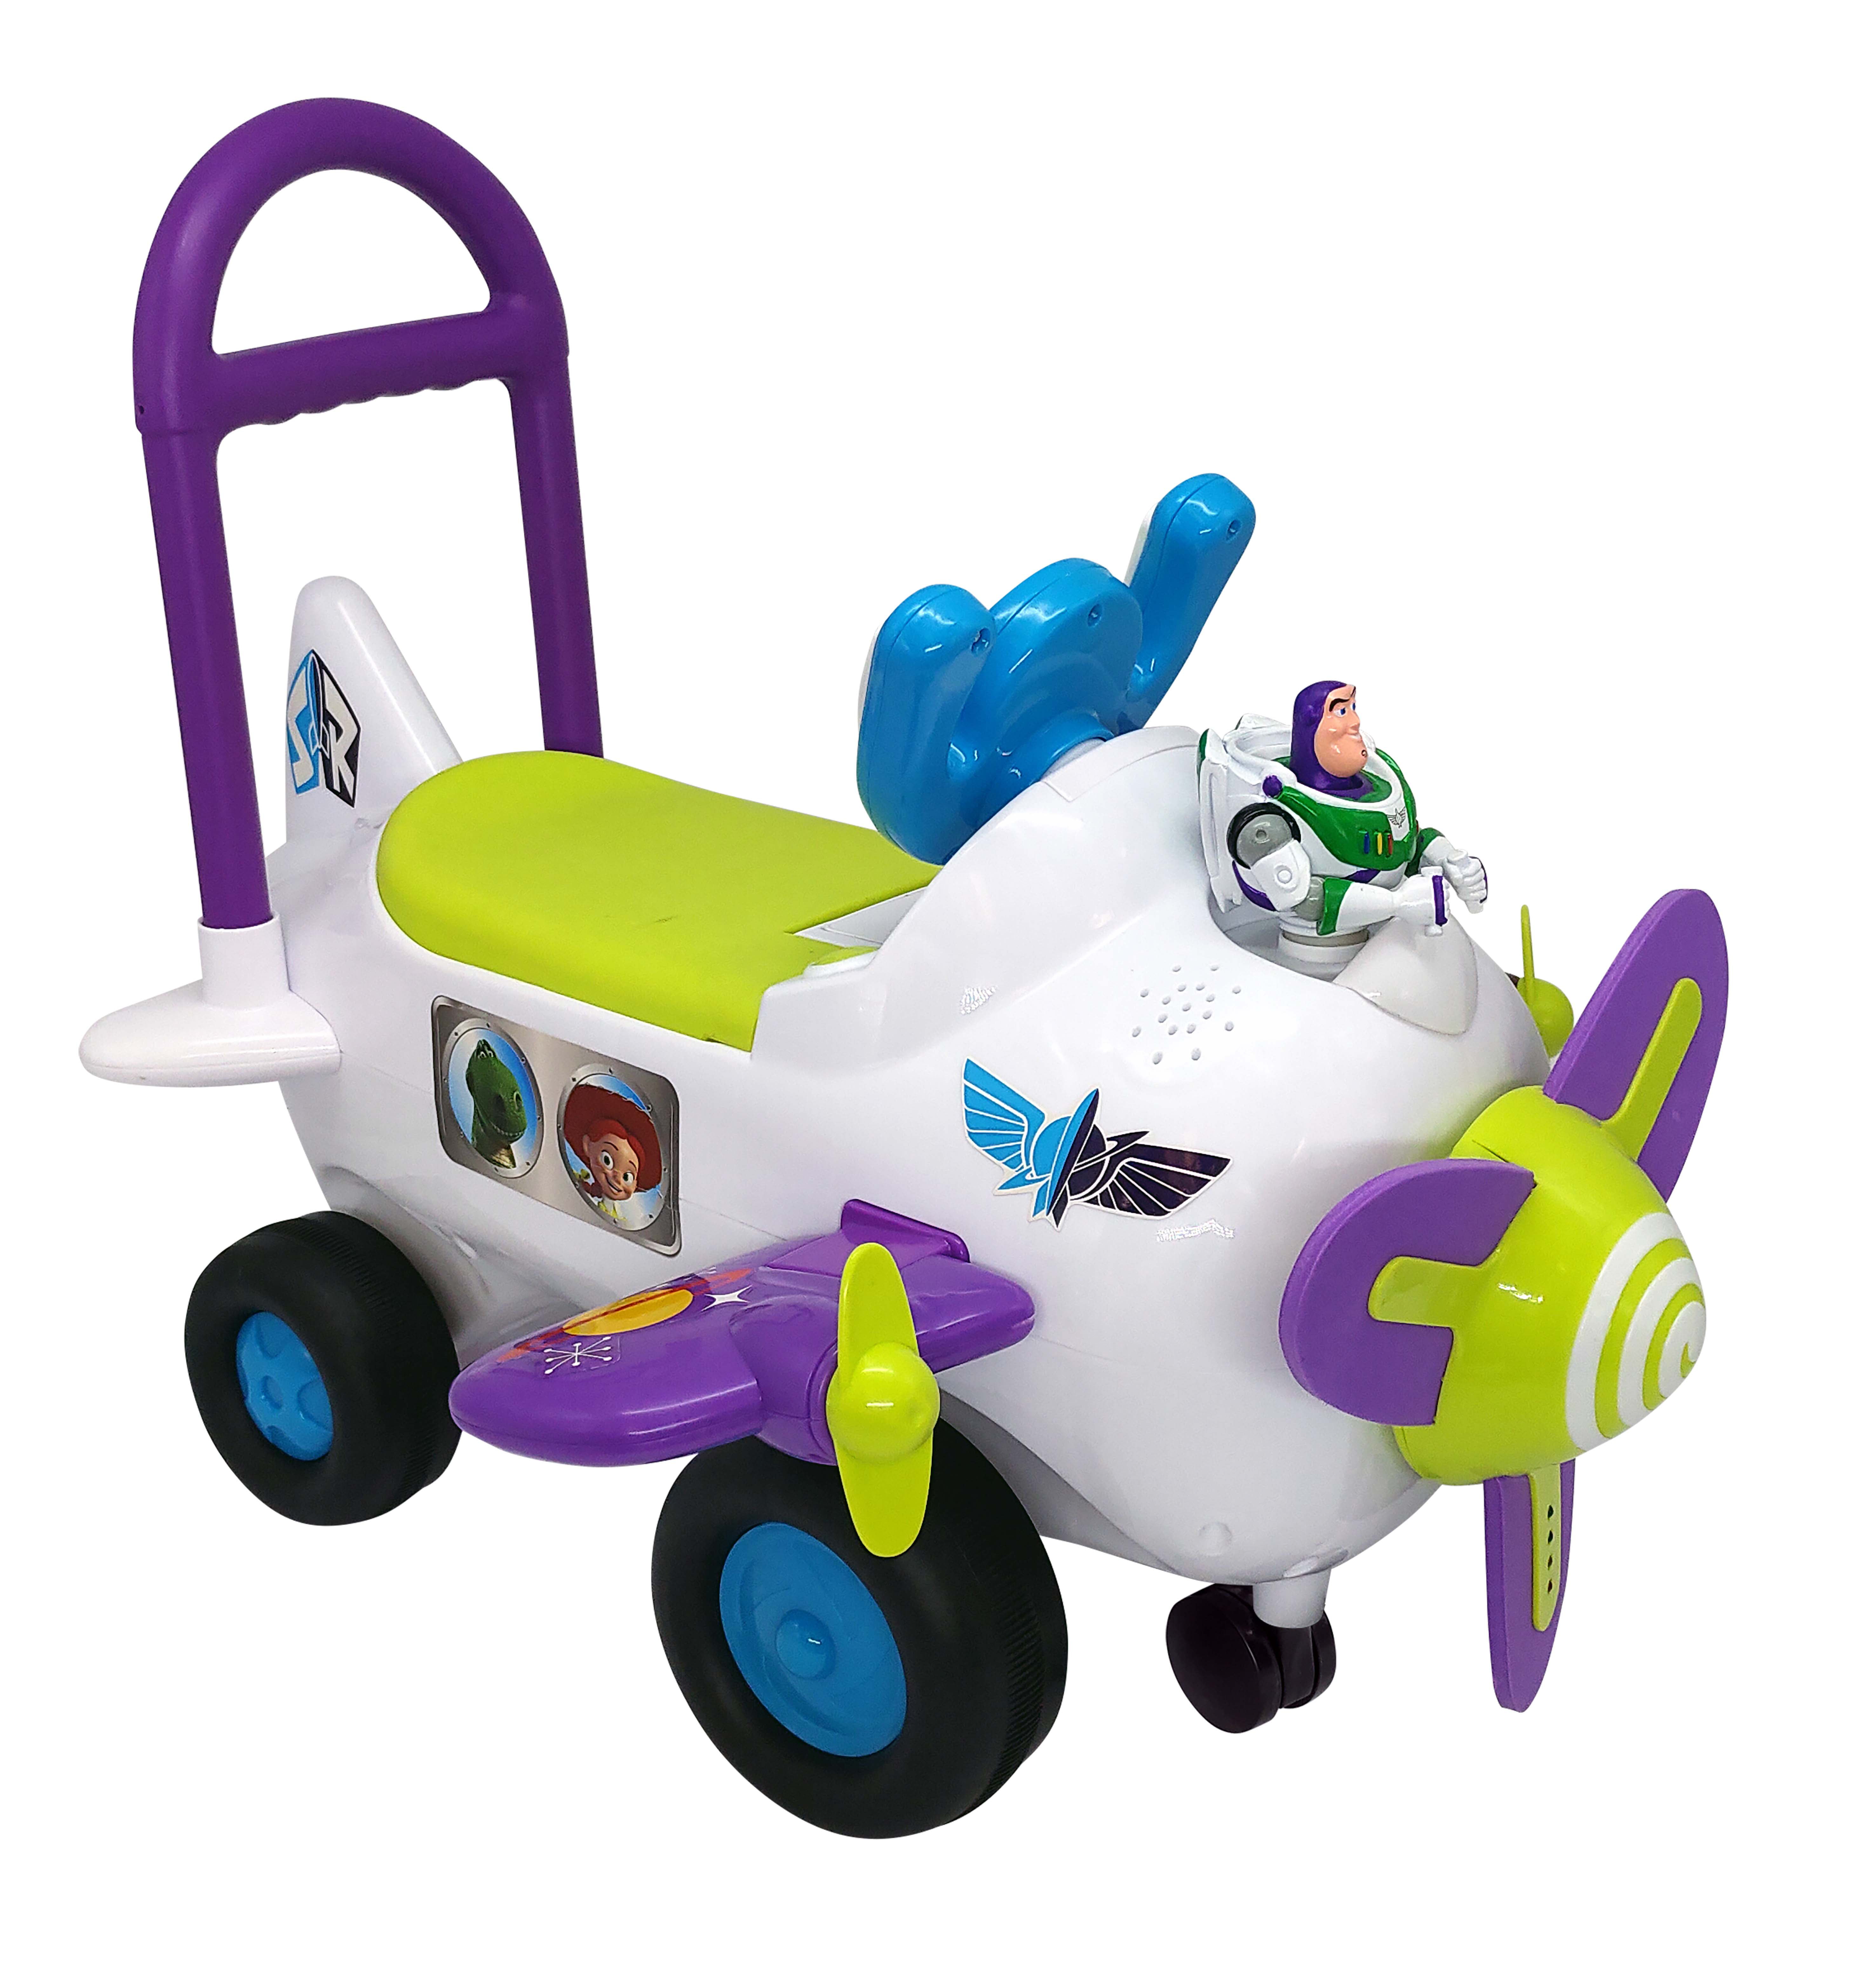 YOU'VE JOINED CART RIDE INTO BUZZ LIGHTYEAR! - Roblox